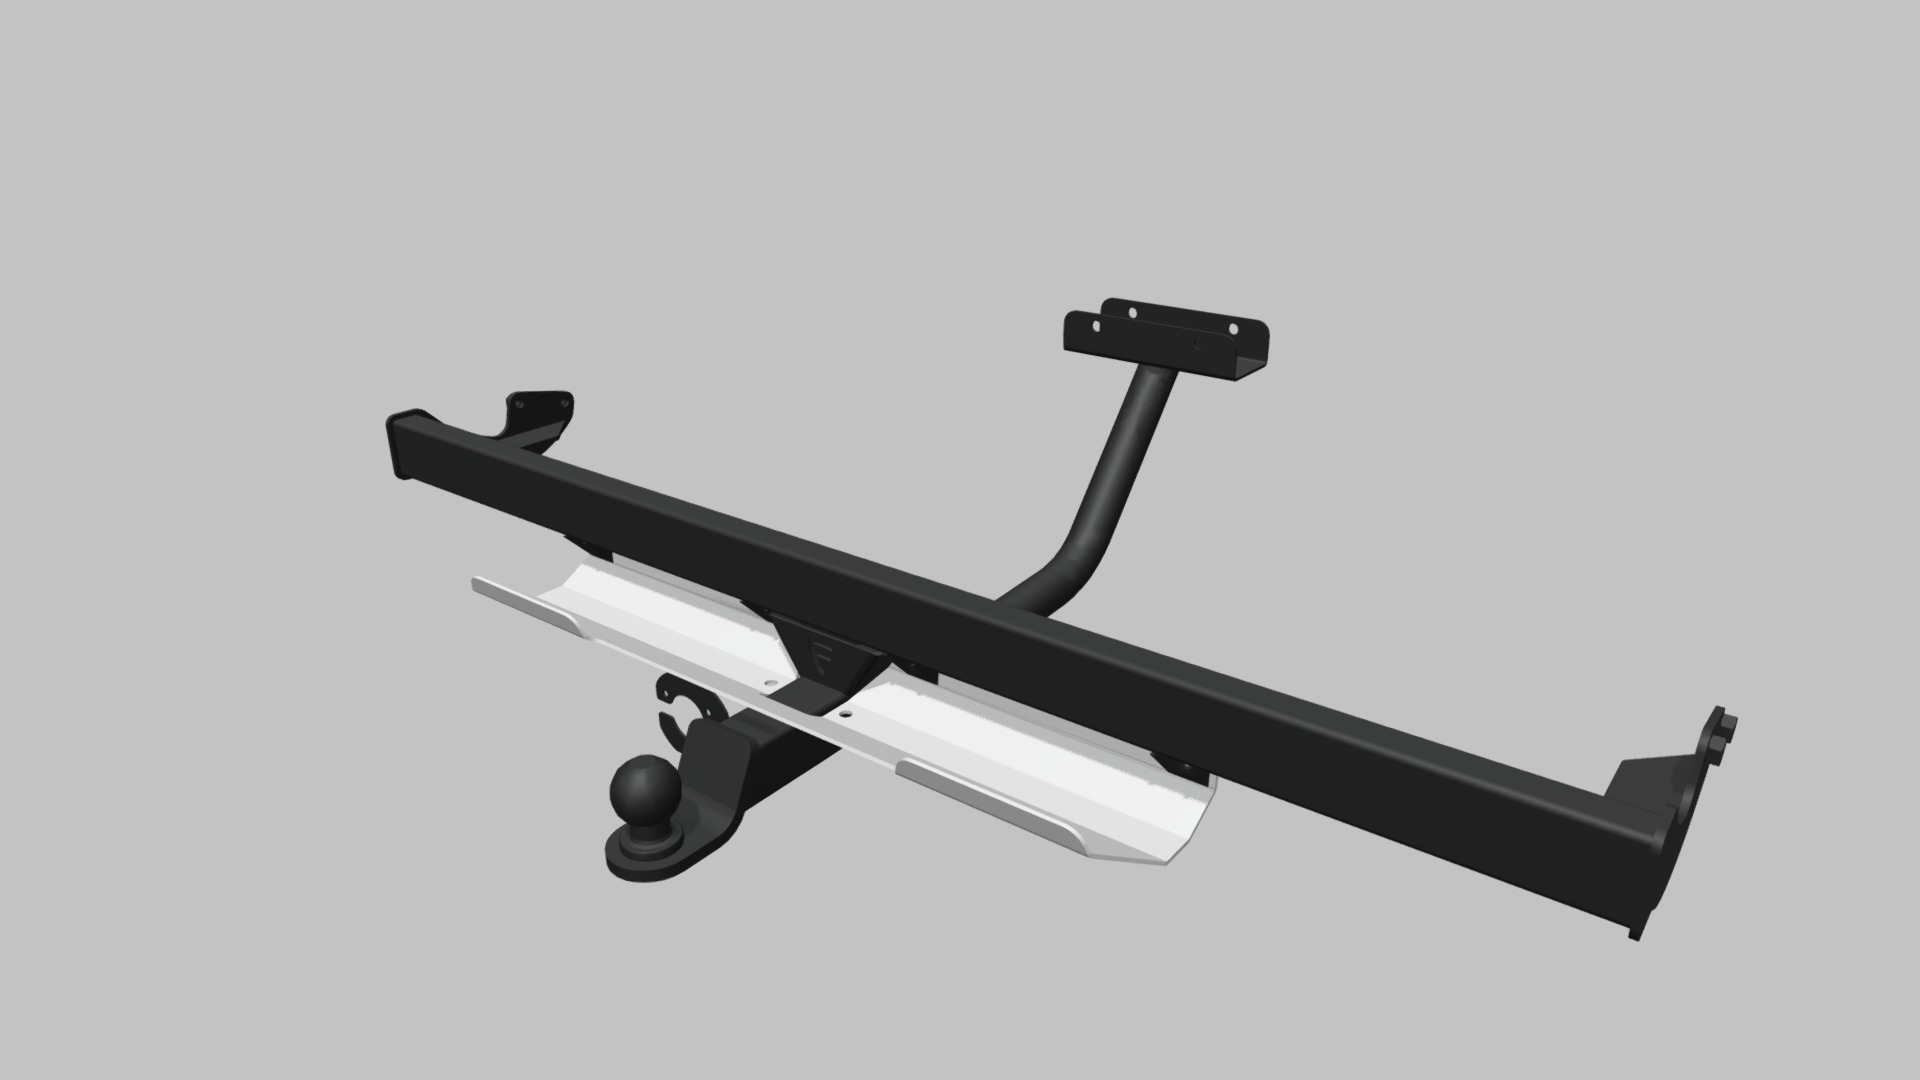 3D model Фаркоп Lada Urban - This is a 3D model of the Фаркоп Lada Urban. The 3D model is about a black and white drone.